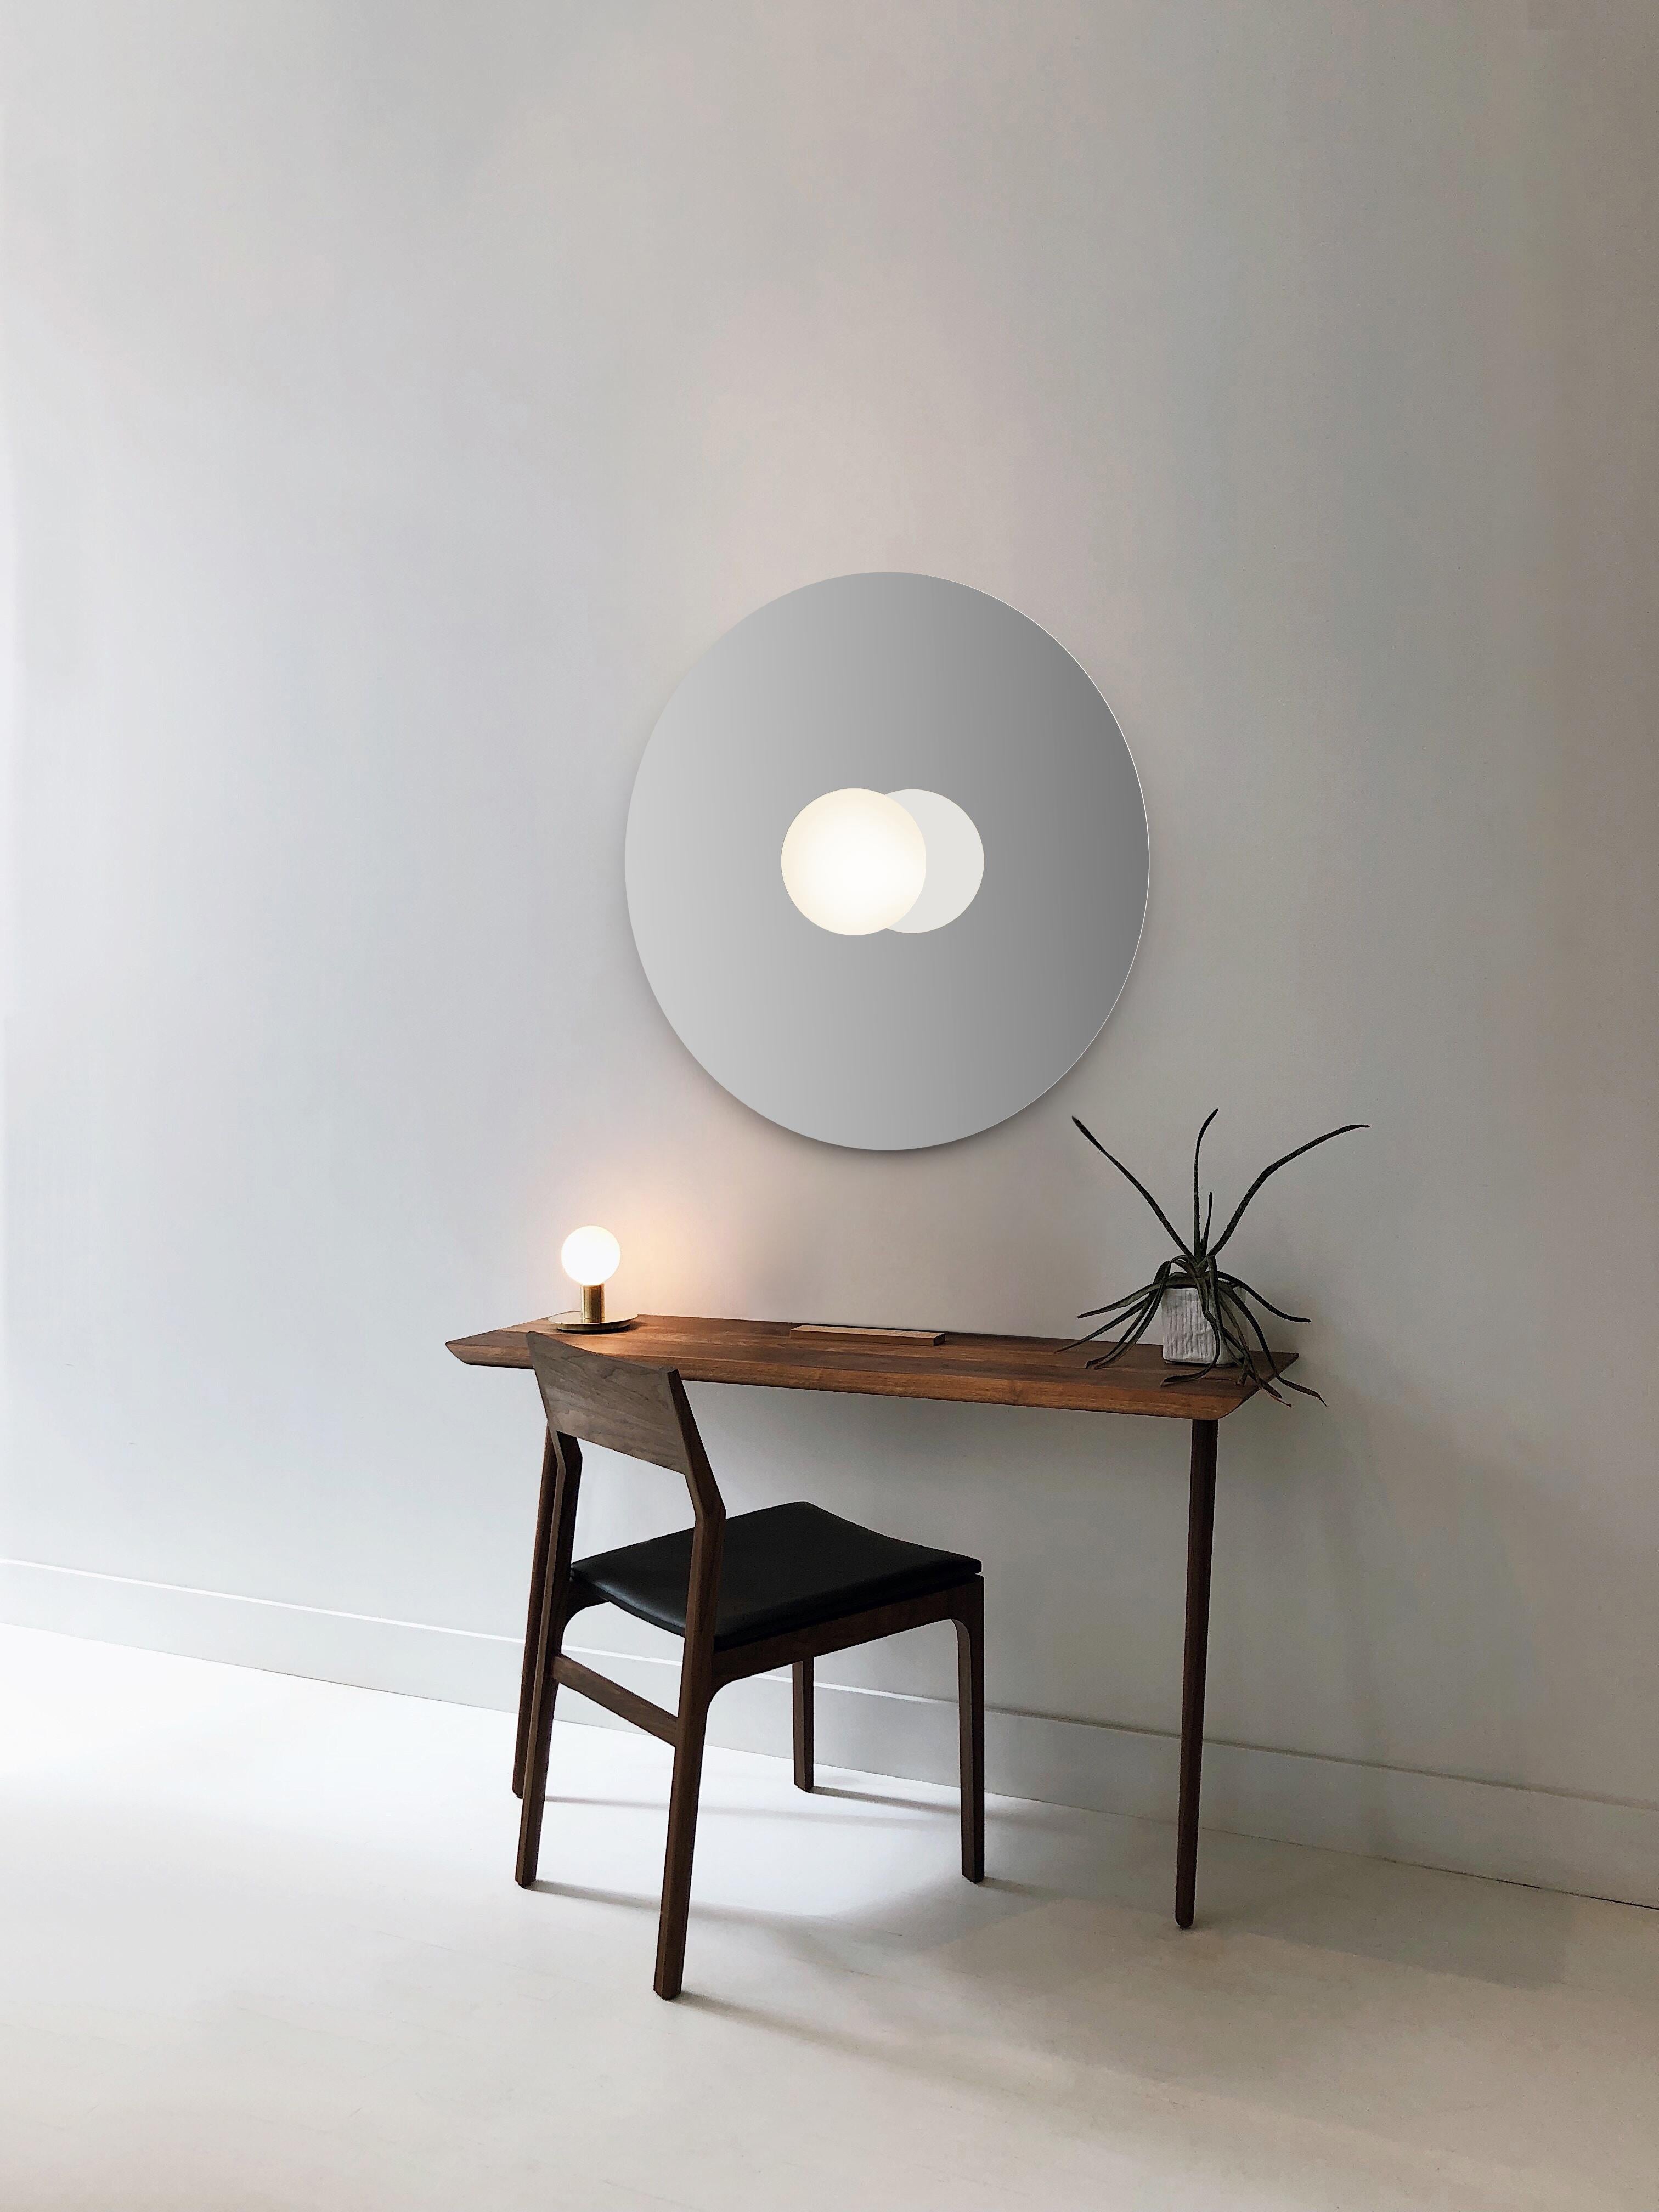 A study in refined simplicity, bola disc flush offers a magical combination of mirror and globe refined down to its bare essentials. The objective with the Bola Disc Flush is to provide both direct and reflected light from either ceiling or wall